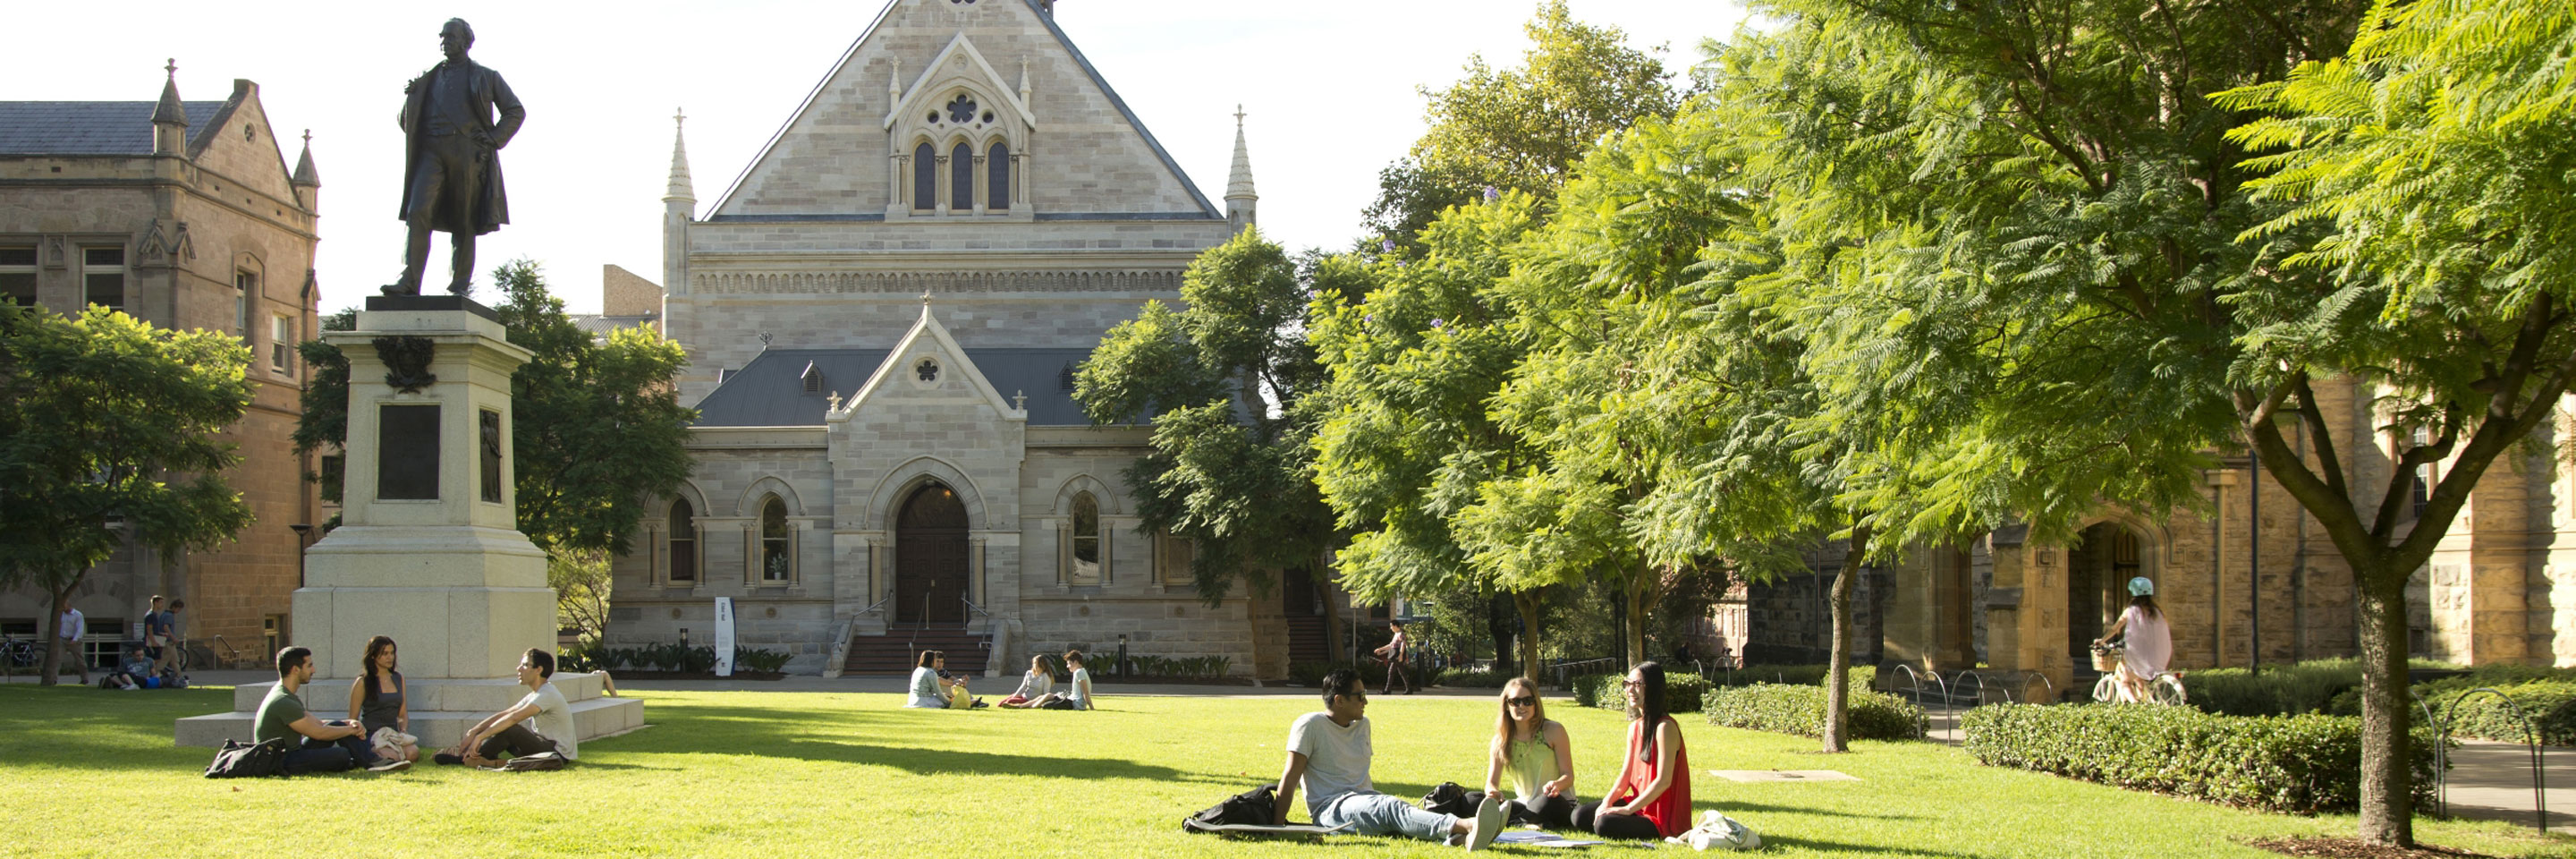 The Australia Awards offer a world-class education in a friendly and safe multicultural society, with the opportunity to make links with Australia’s public, private, academic and NGO networks (Photo courtesy of The University of Adelaide).